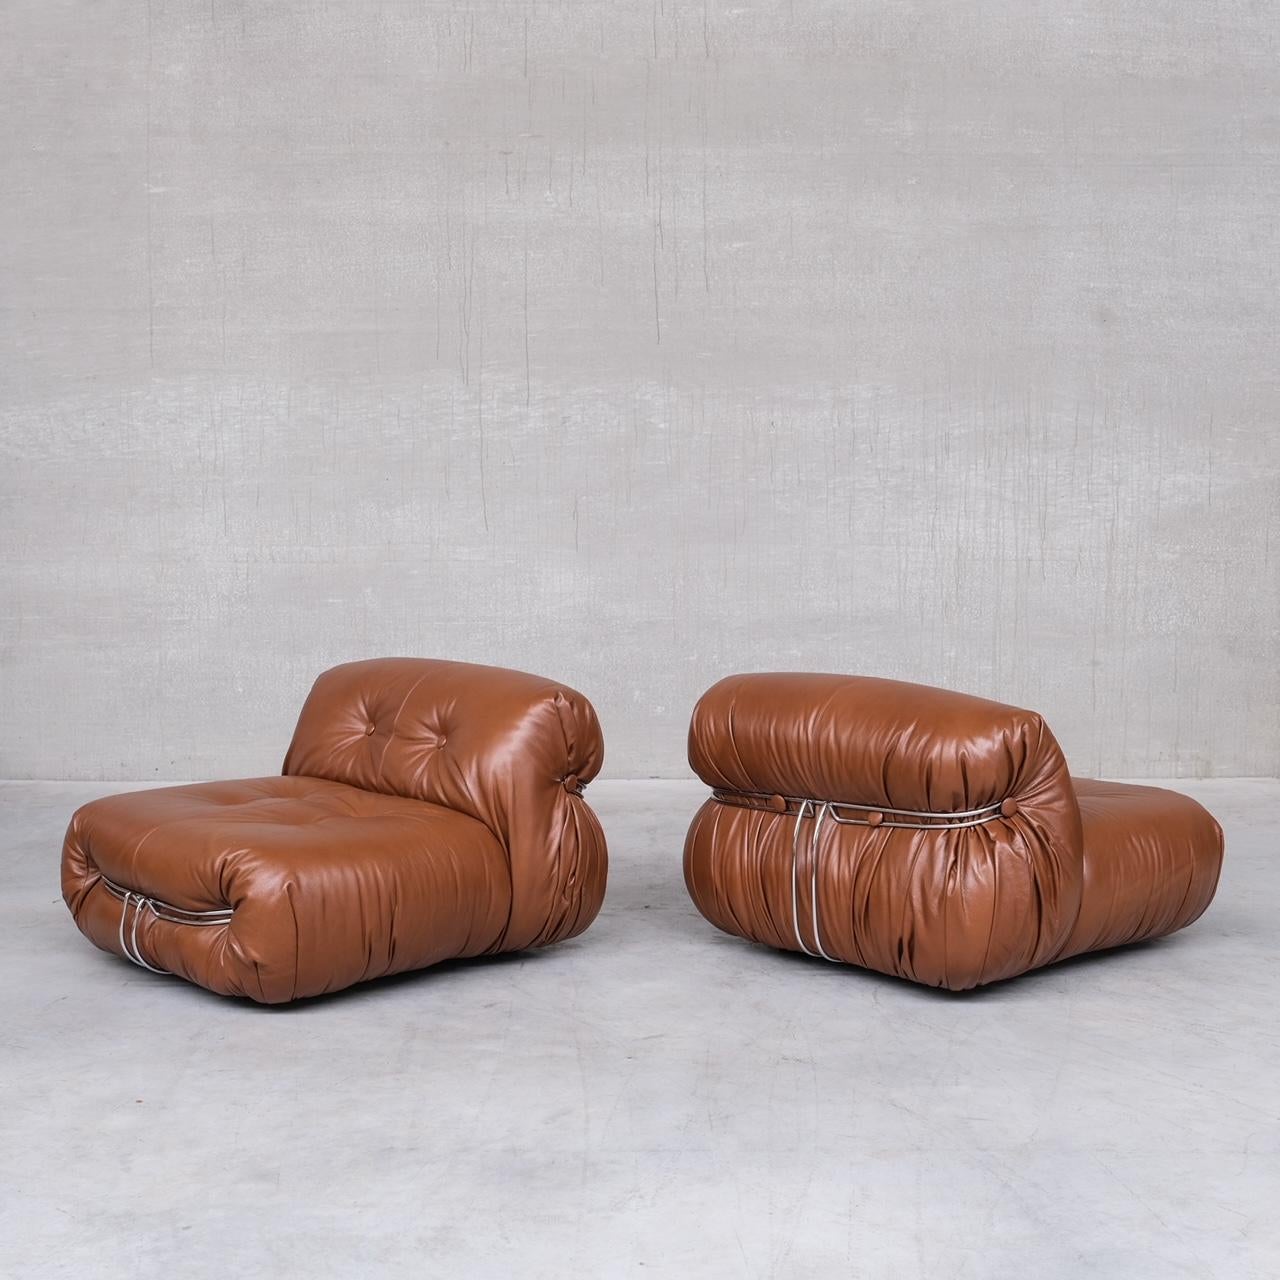 Pair of Leather Soriana Lounge Chairs by Scarpa for Cassina 6